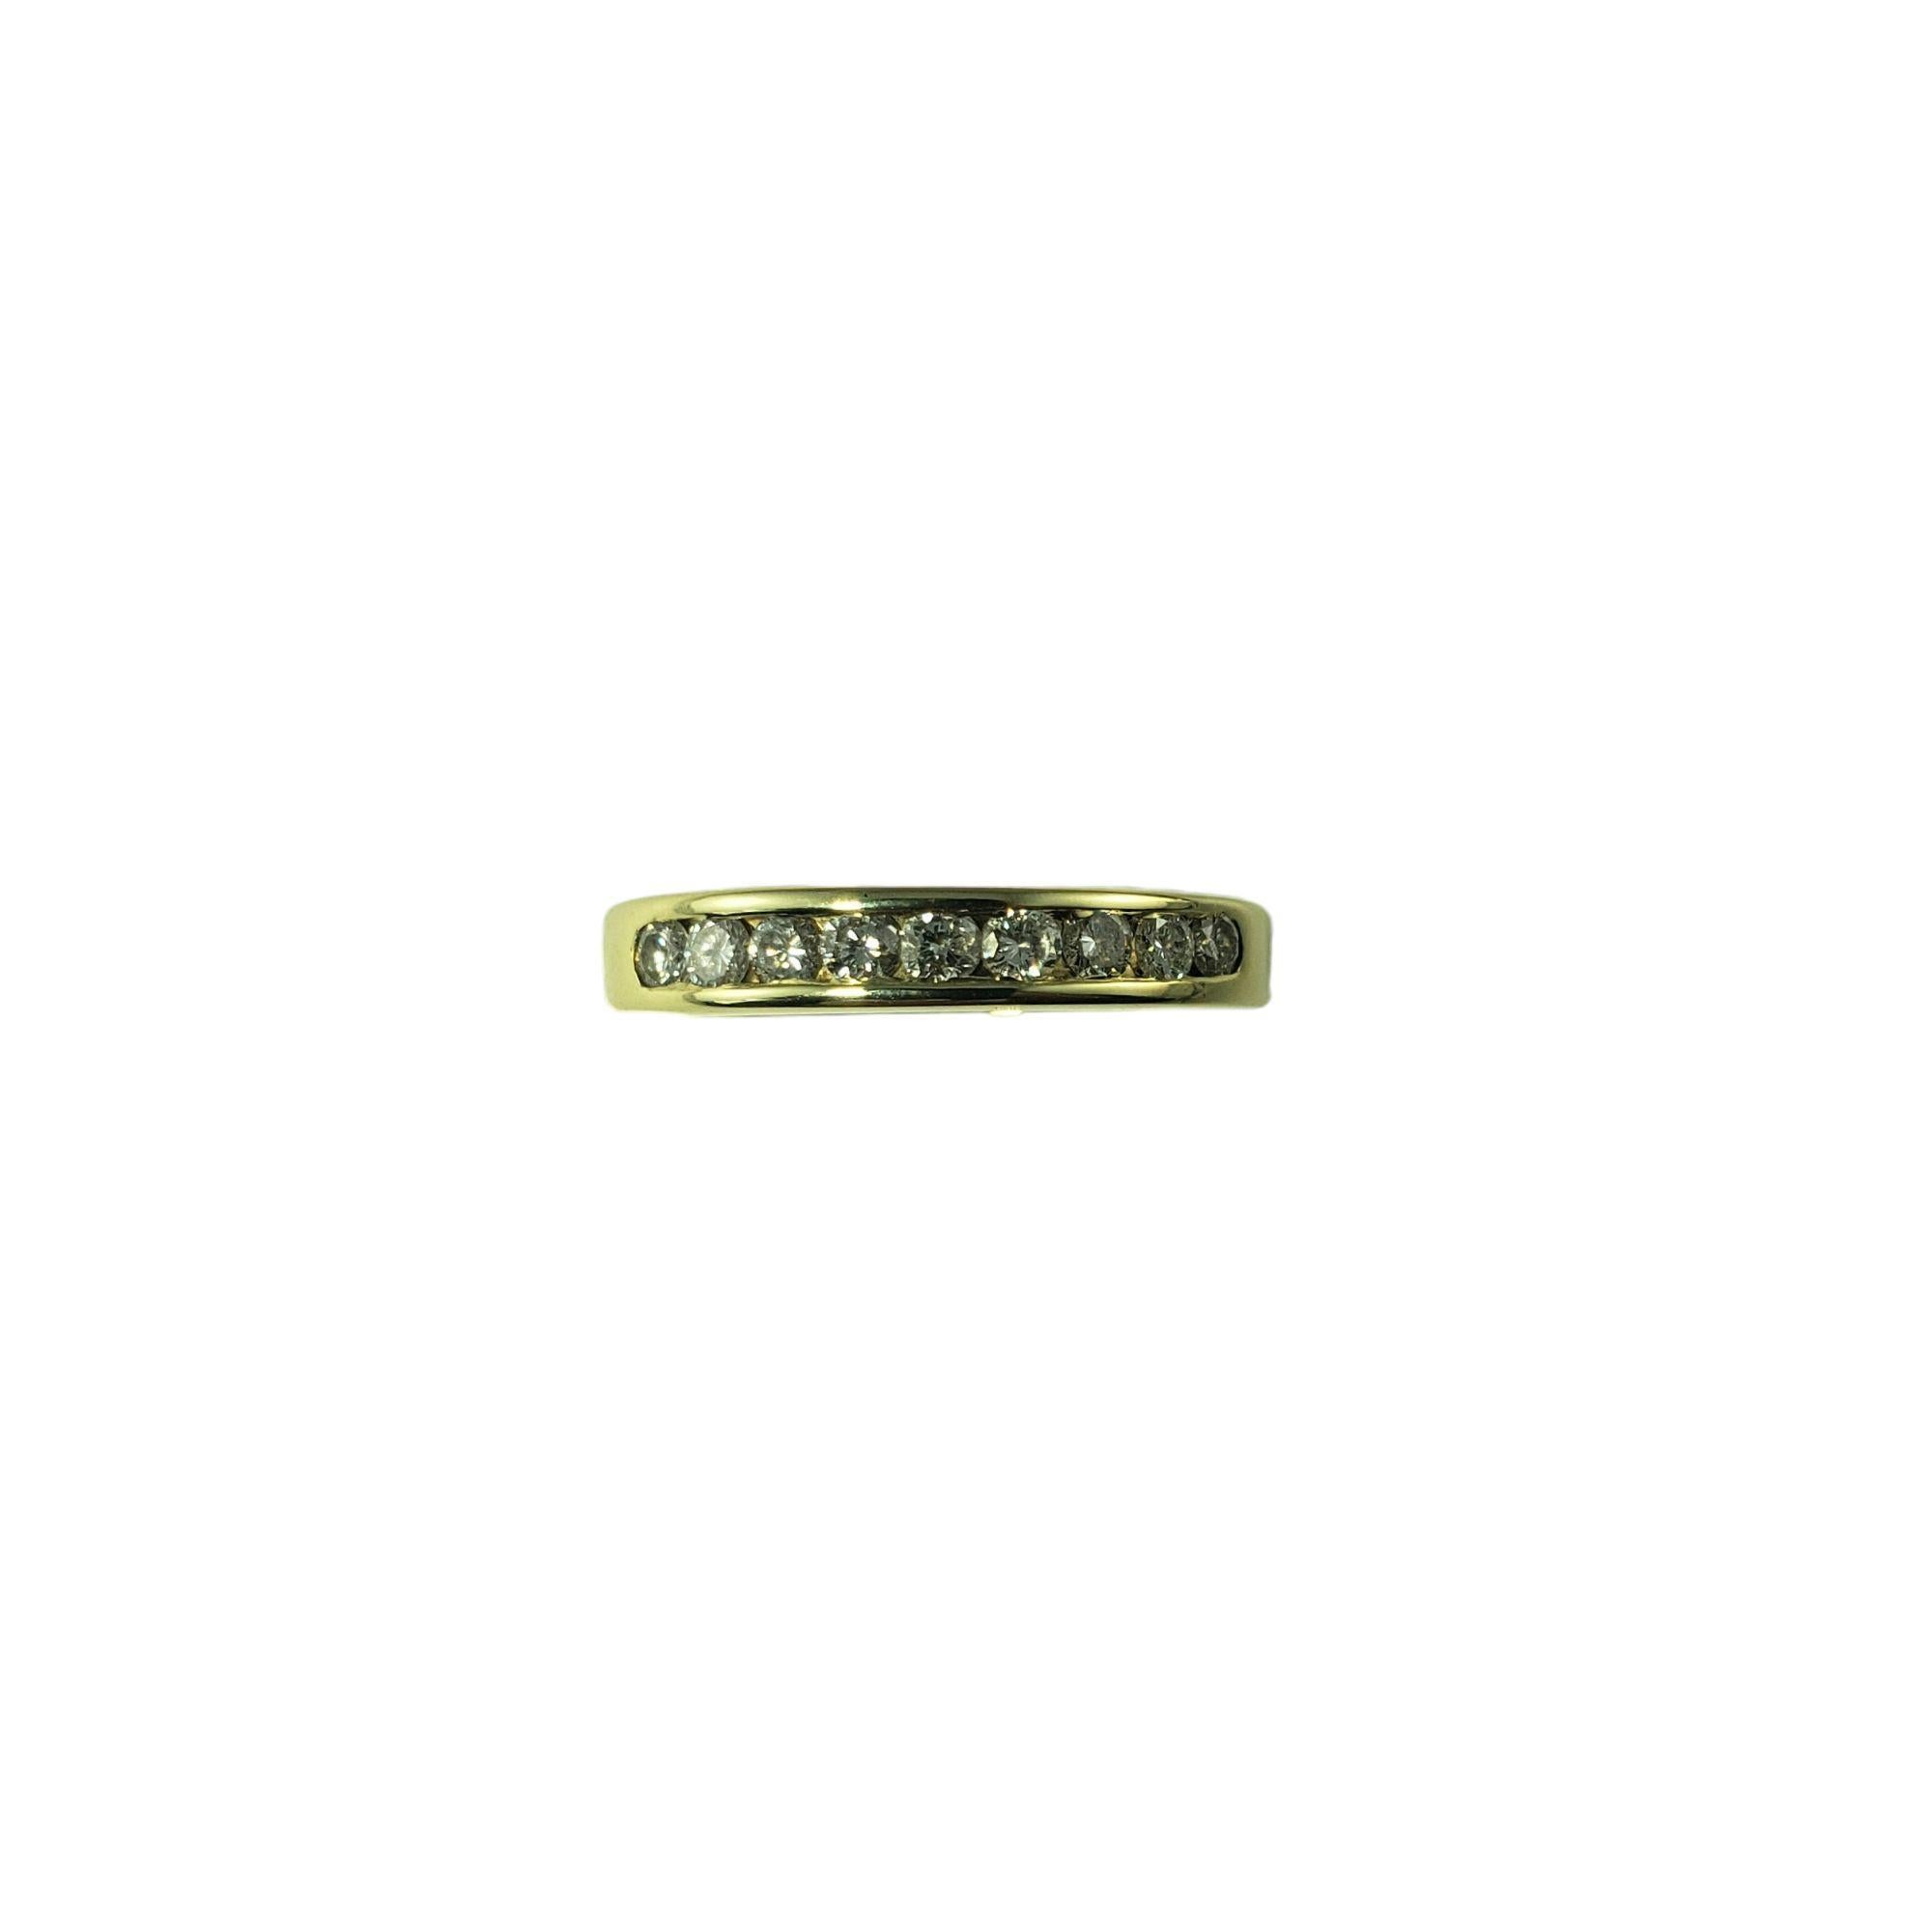 Vintage 18 Karat Yellow Gold Diamond Wedding Band Ring Size 6-

This sparkling band features nine round brilliant cut diamonds* set in classic 18K gold. Width: 3 mm.

*Chip noted to one diamond not visible to naked eye.

Approximate total diamond